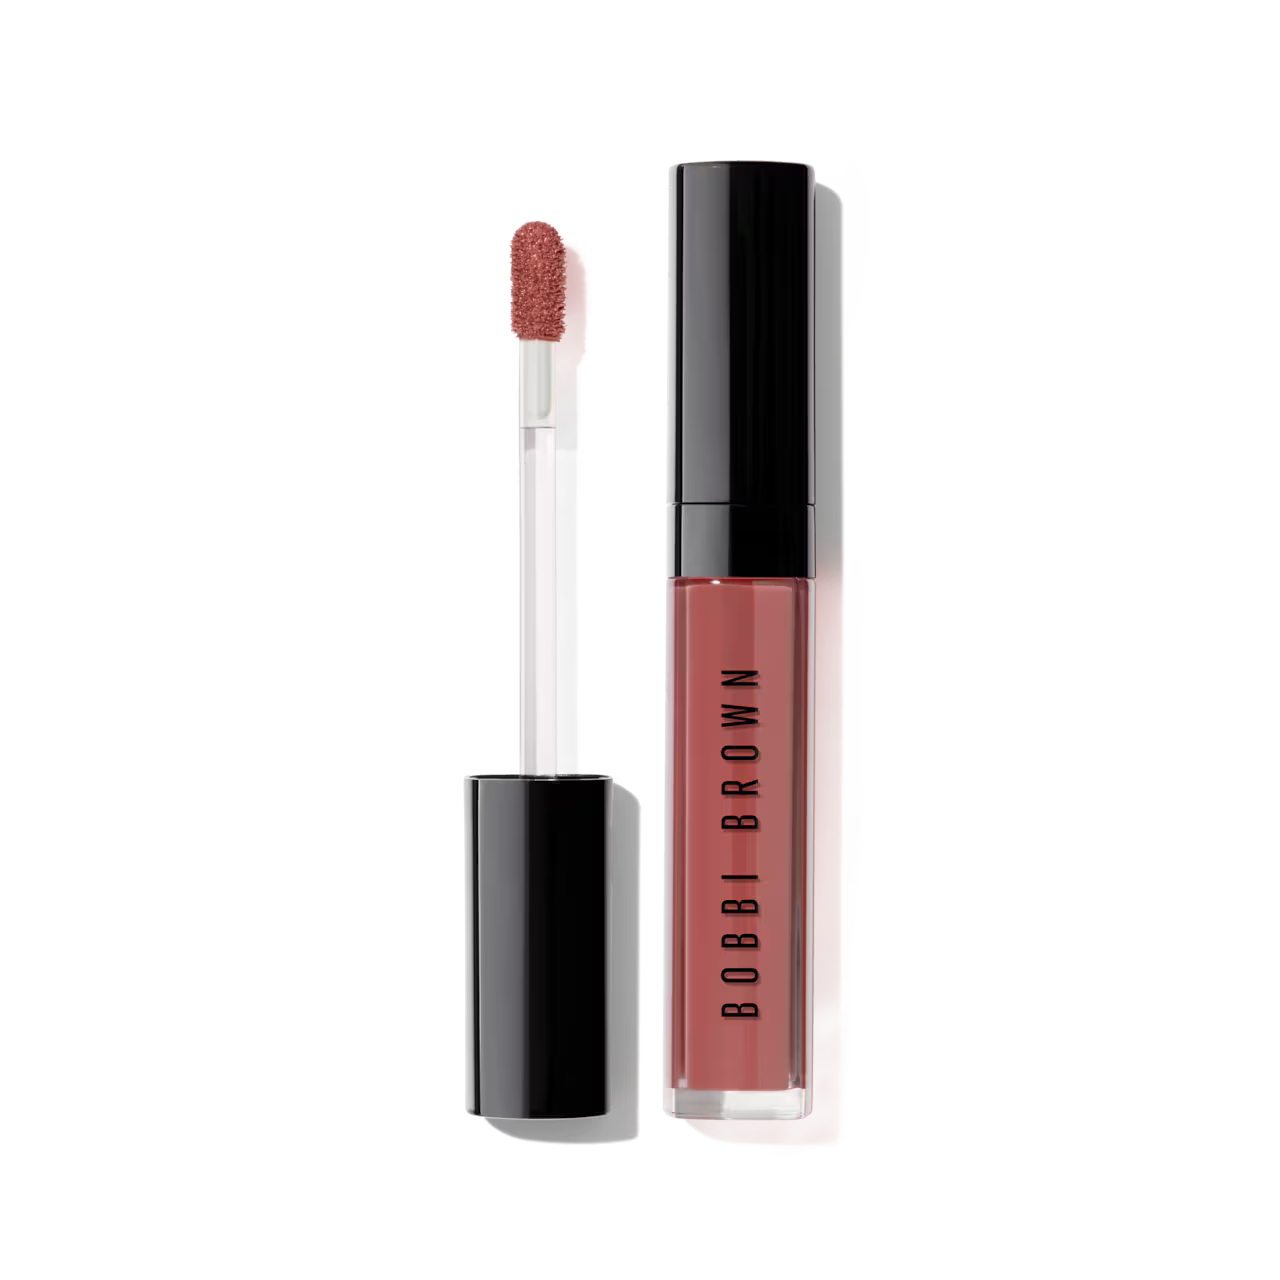 Bobbi Brown Lesk na rty (Crushed Oil-Infused Gloss) 6 ml Force Of Nature